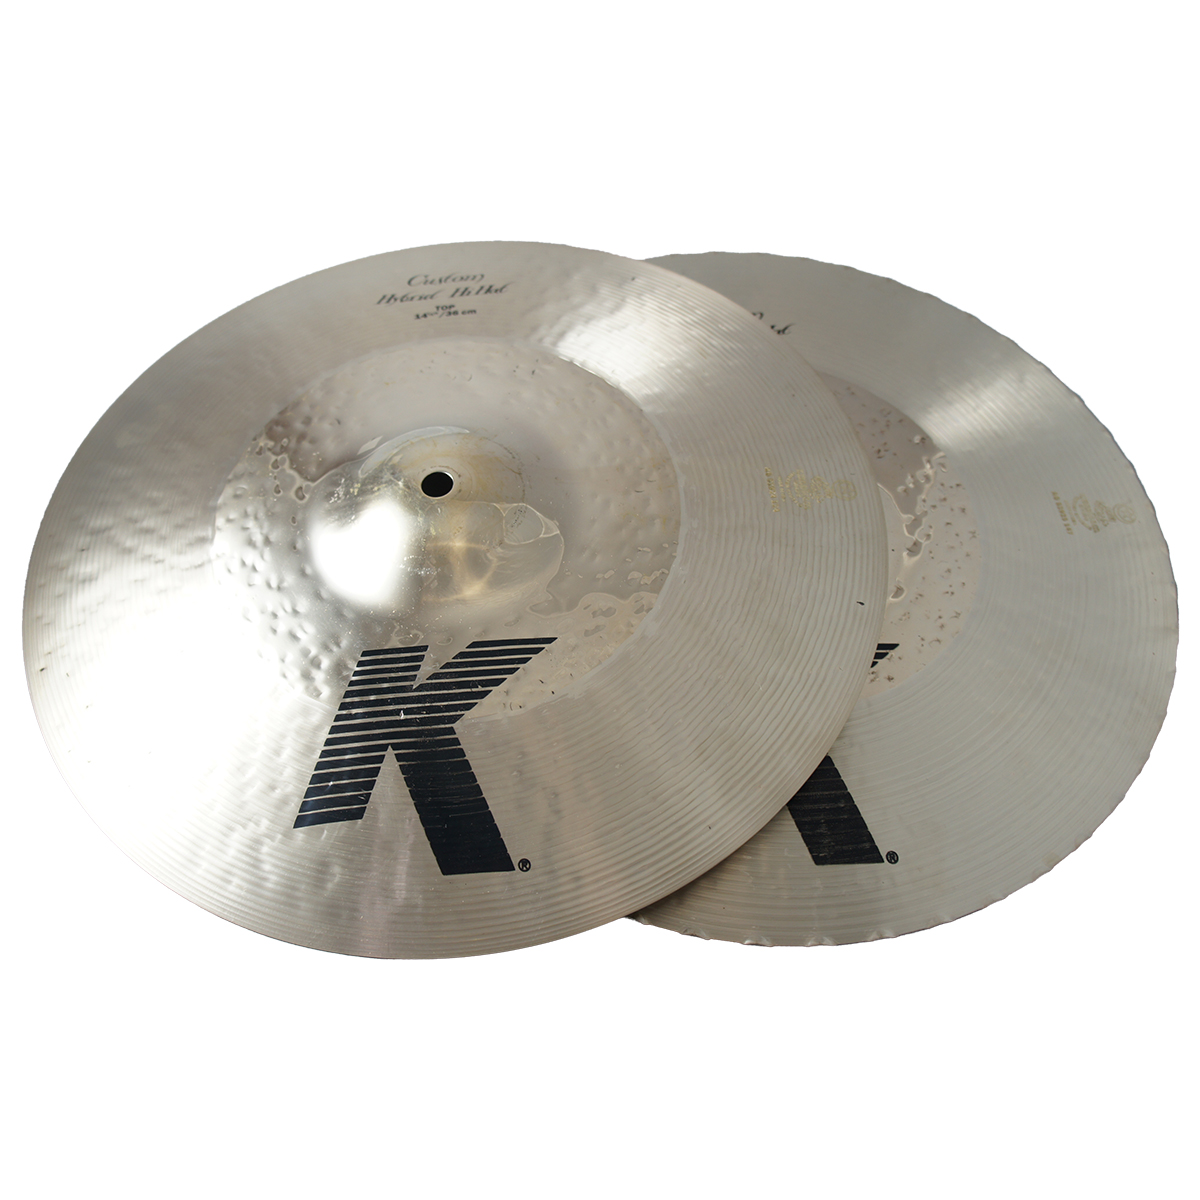 Zildjian 14 1/4" K Custom Series Hybrid Hi Hat Pair Drumset Cast Bronze Cymbals with Solid Chick Sound and Small Bell Size K1224